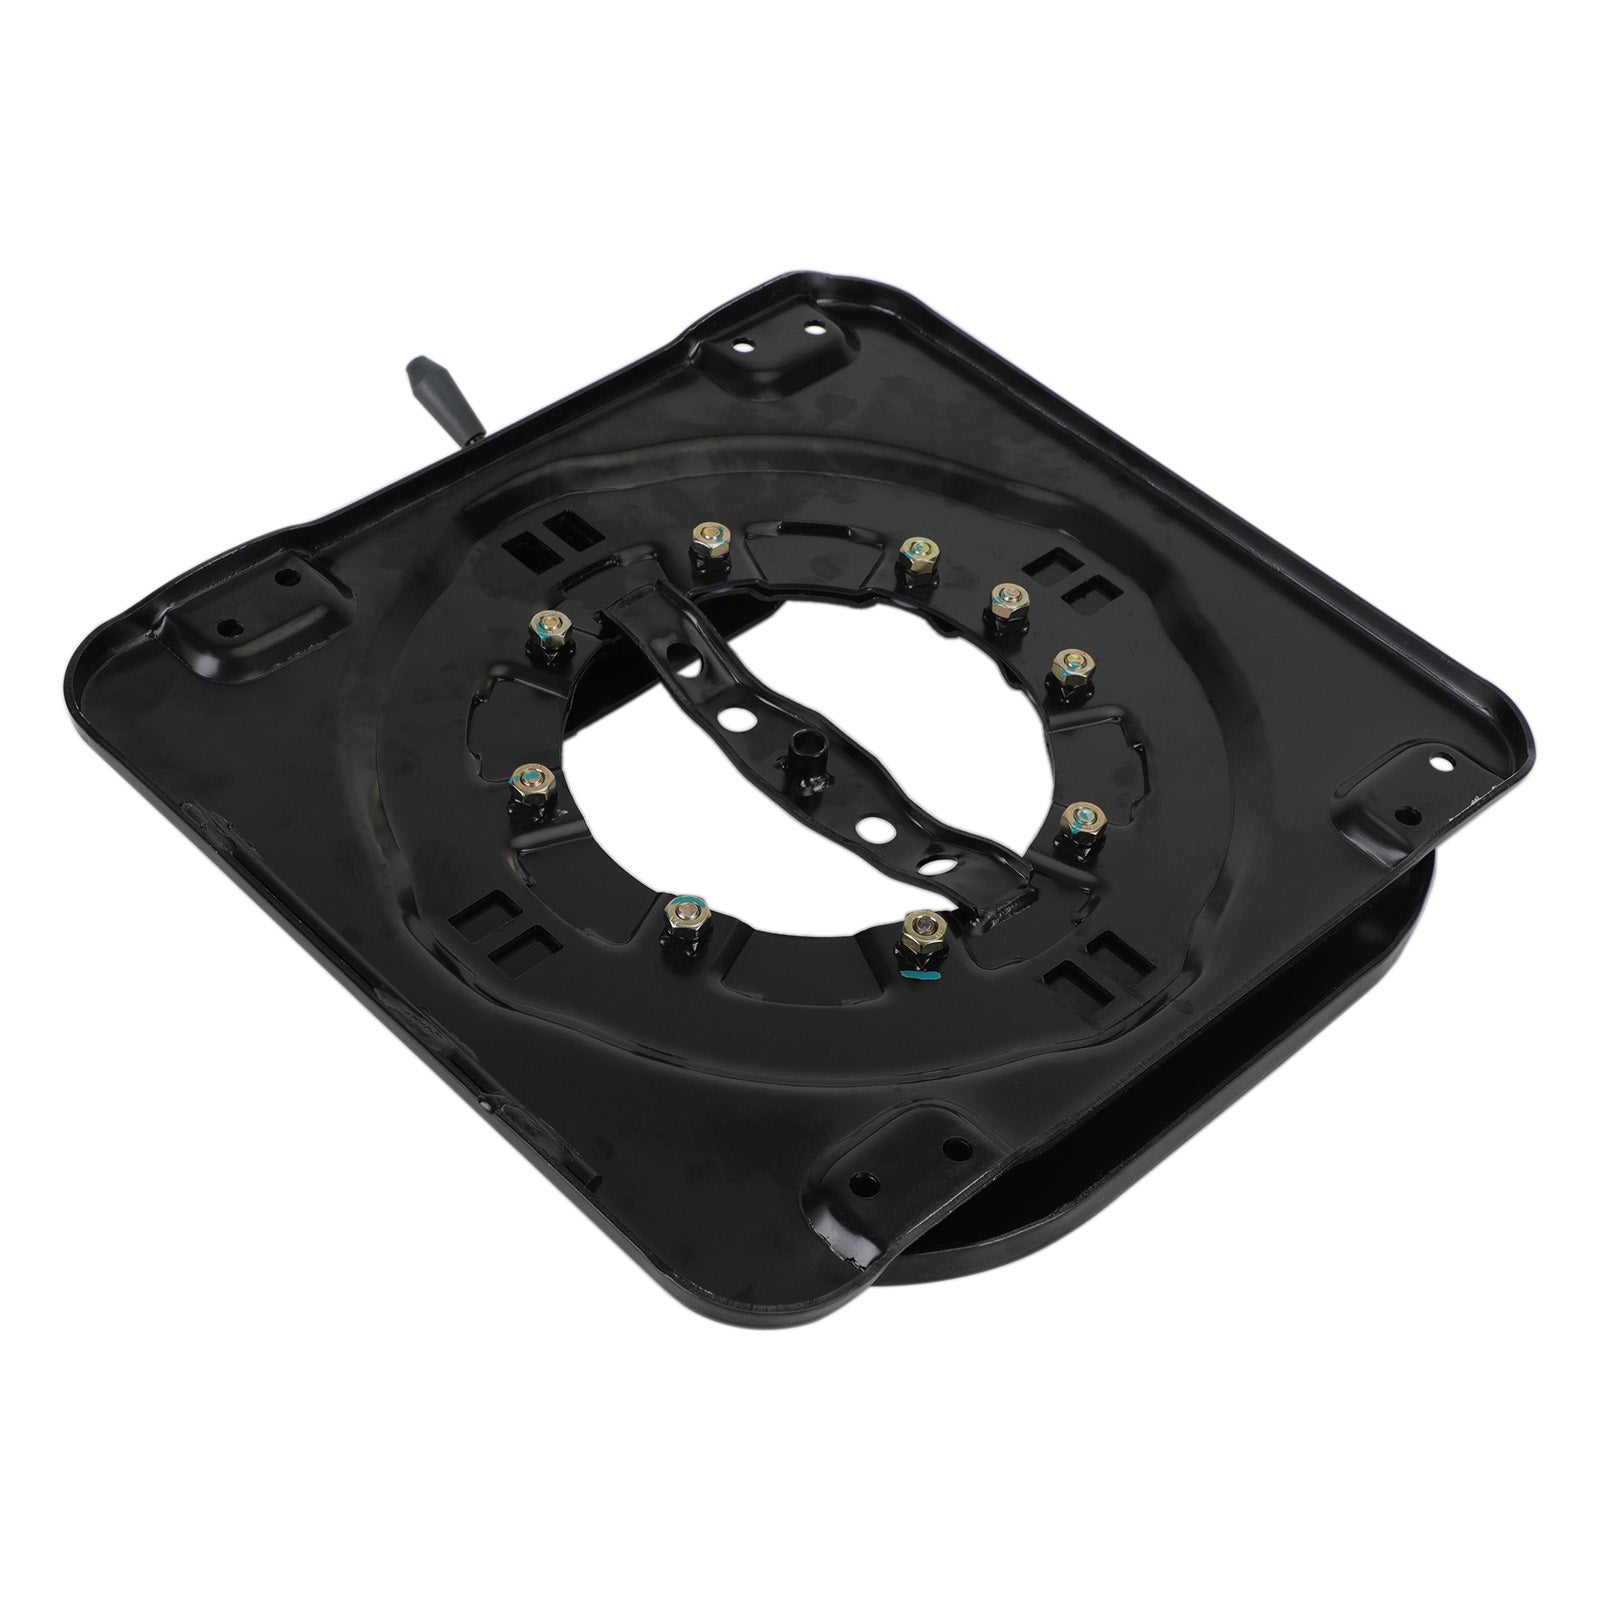 Motorhome Seat Swivel Turntable Universal Campervan Chassis Modification